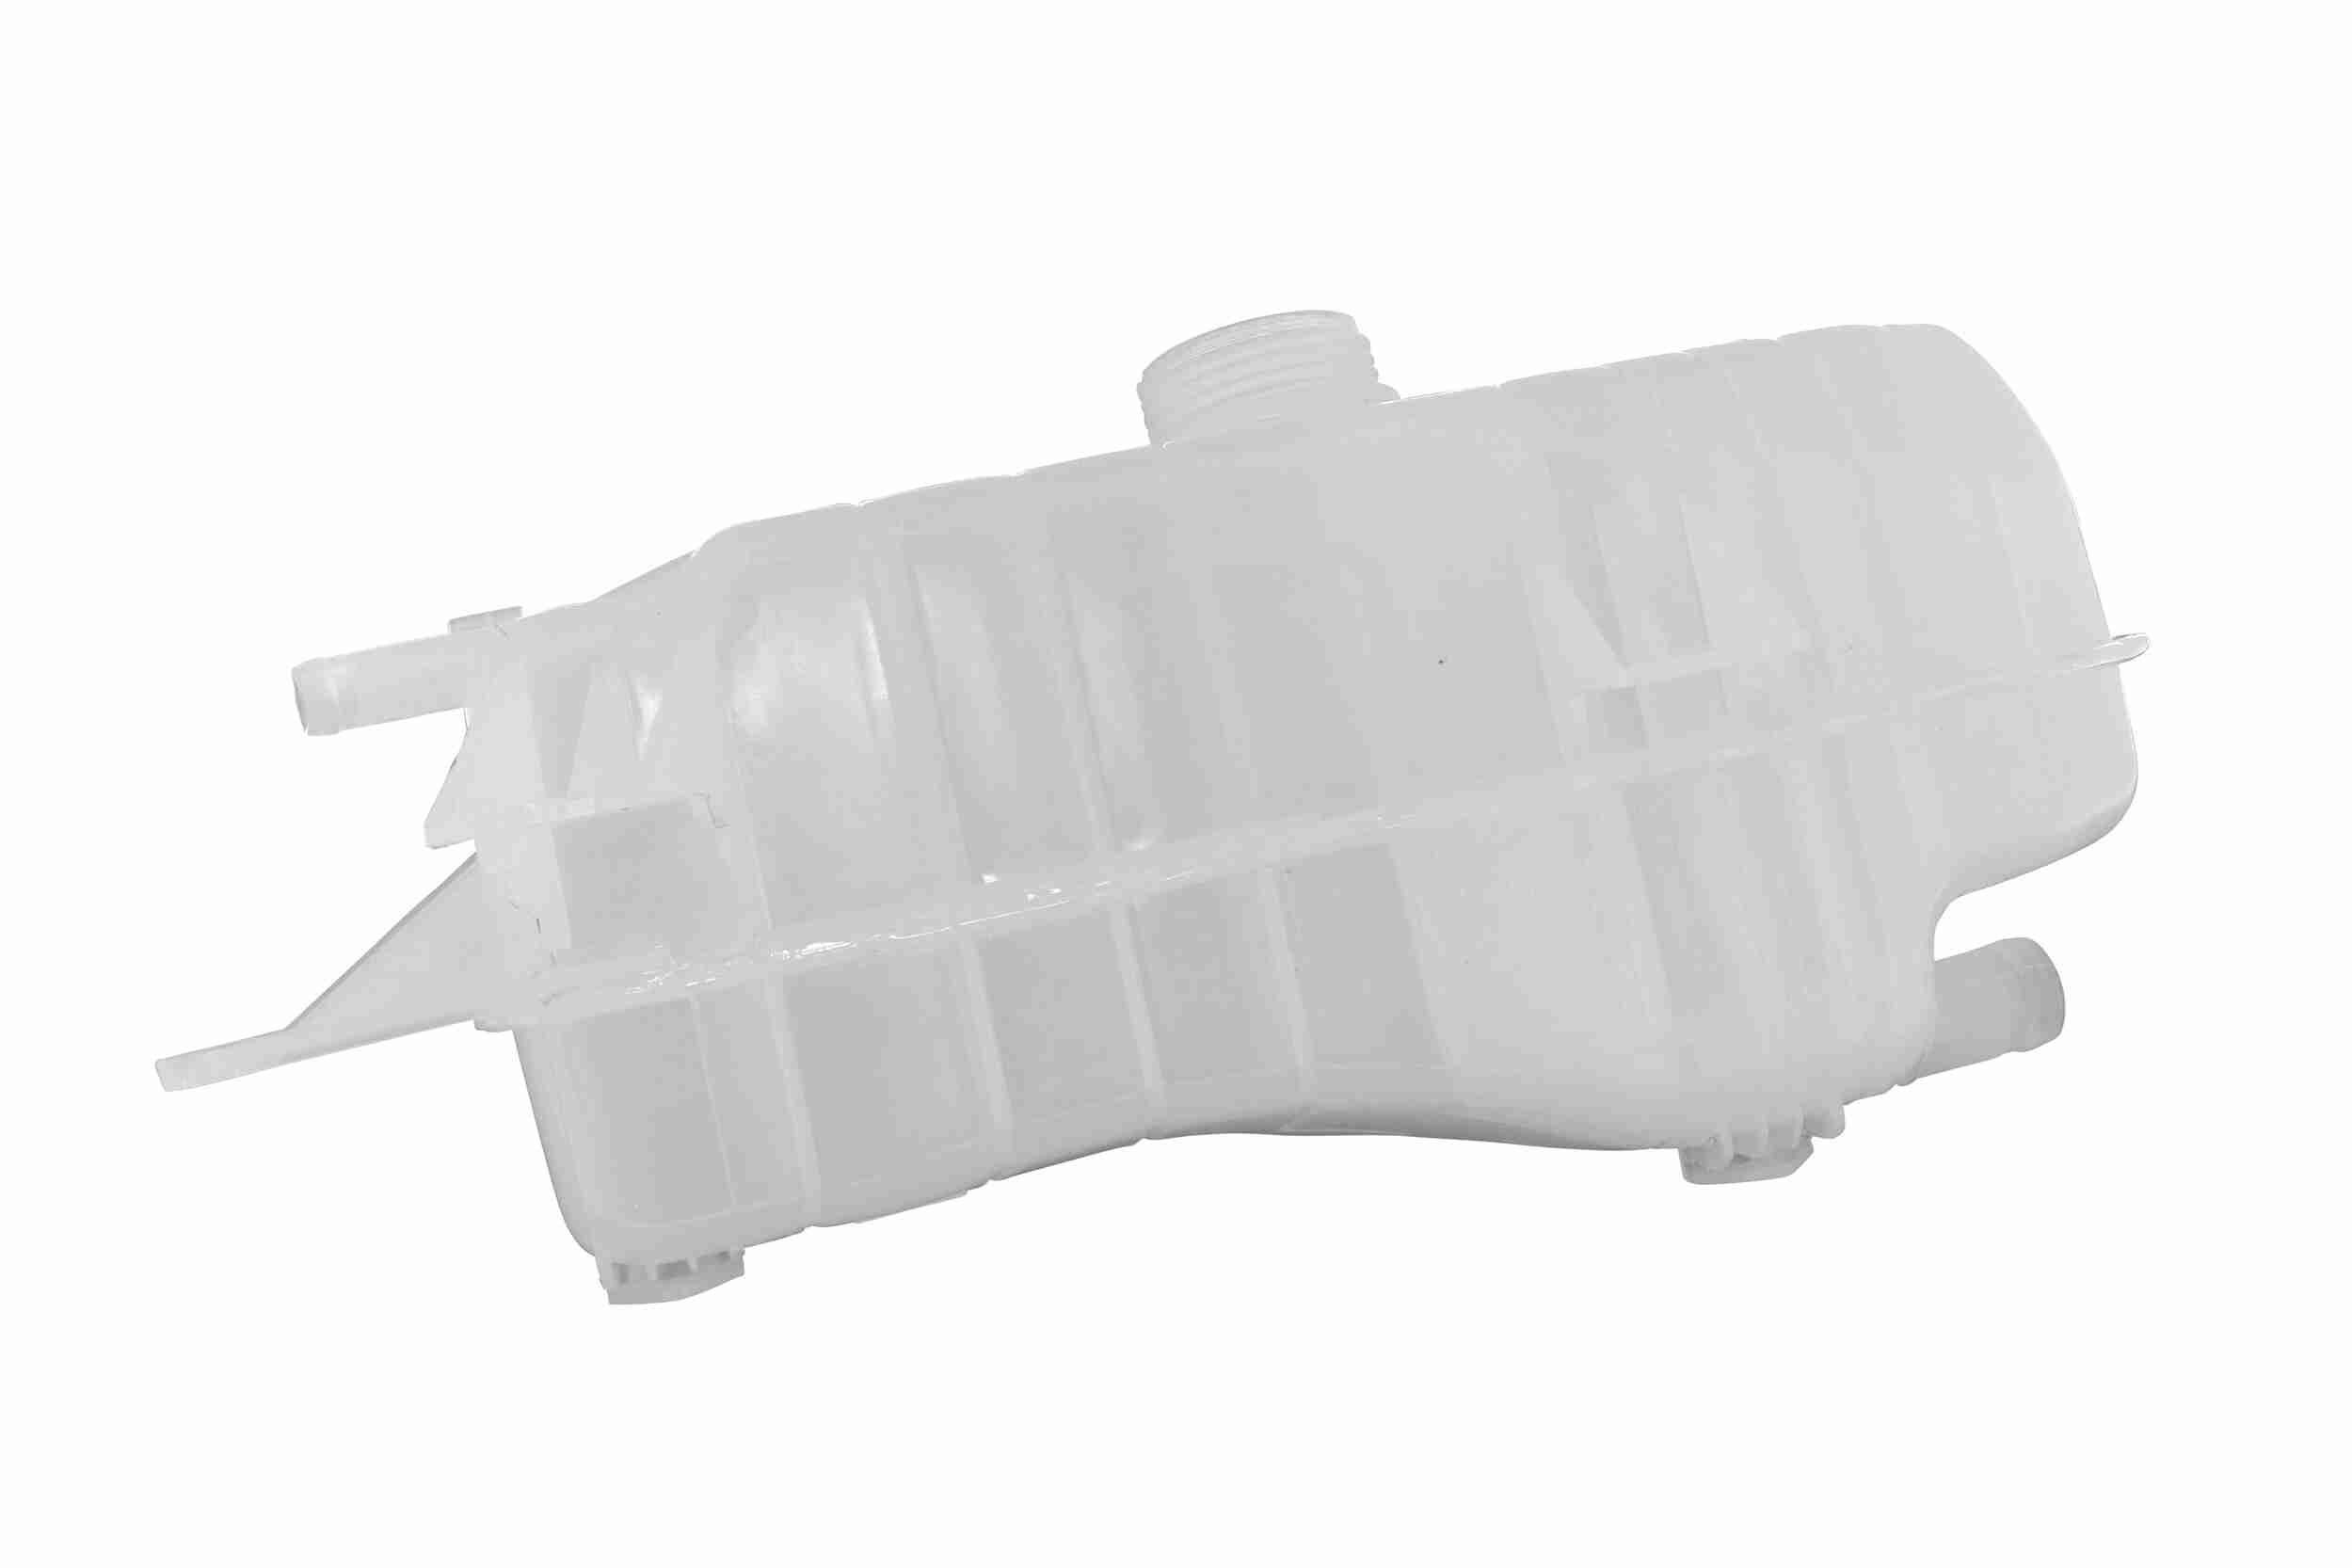 ACKOJA Coolant reservoir A38-0132 for NISSAN MICRA, NOTE